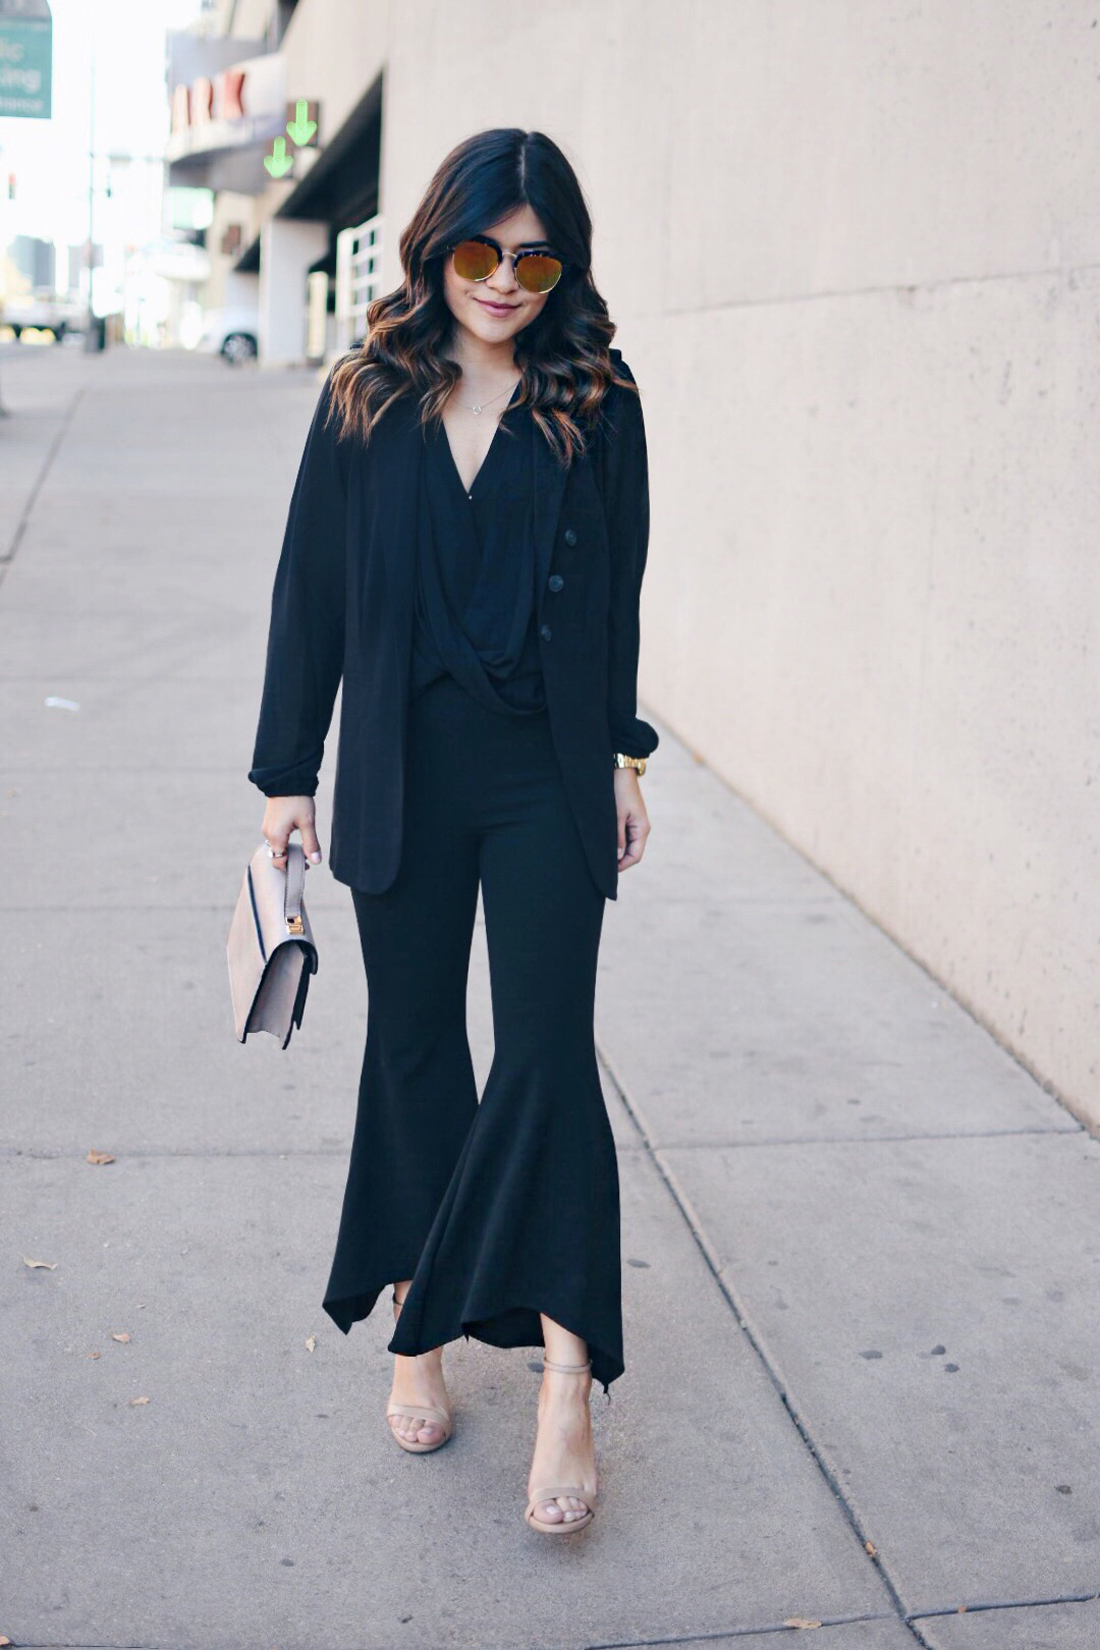 Carolina Hellal of Chic Talk wearing a Forever21 chiffon top, SheIn cropped bell bottom pants, Kensie black vest and Steve Madden nude sandals